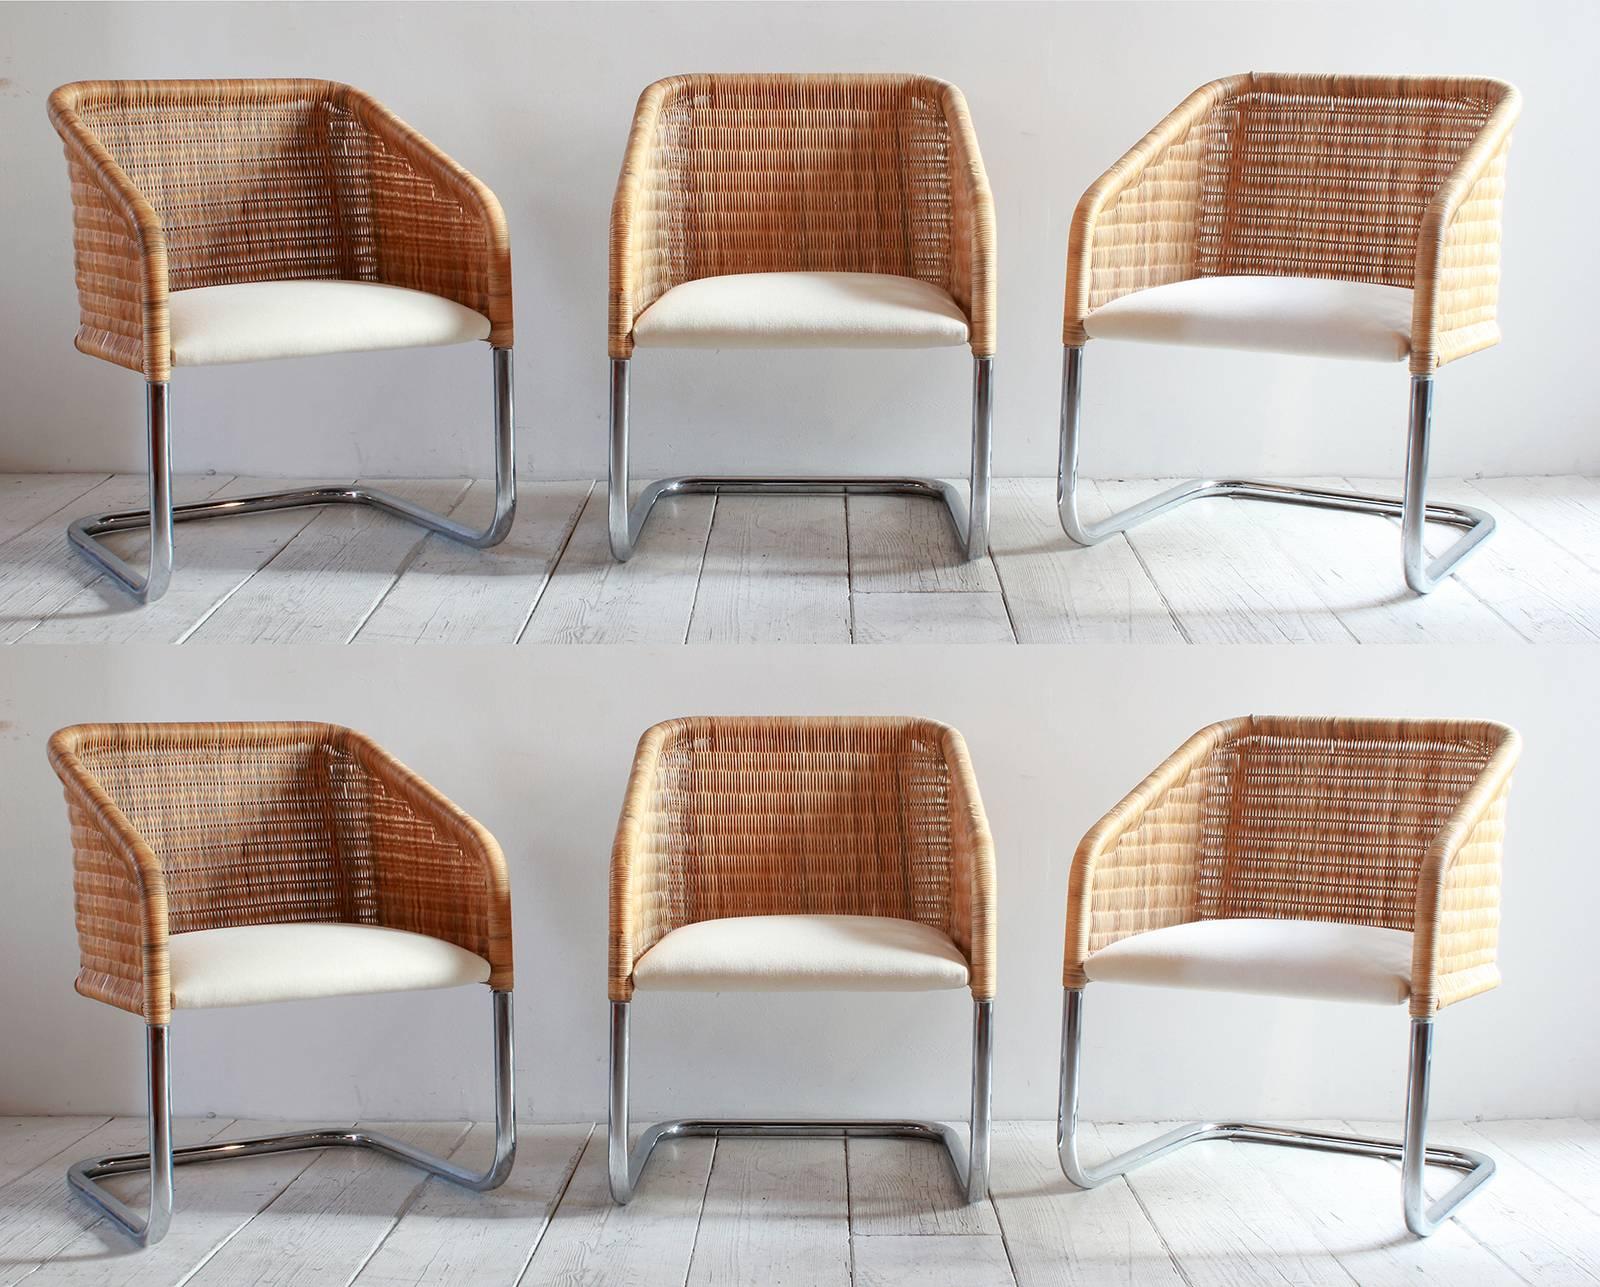 Set of six Harvey Probber style wicker and chrome basket chairs with a newly upholstered linen seat cushion.